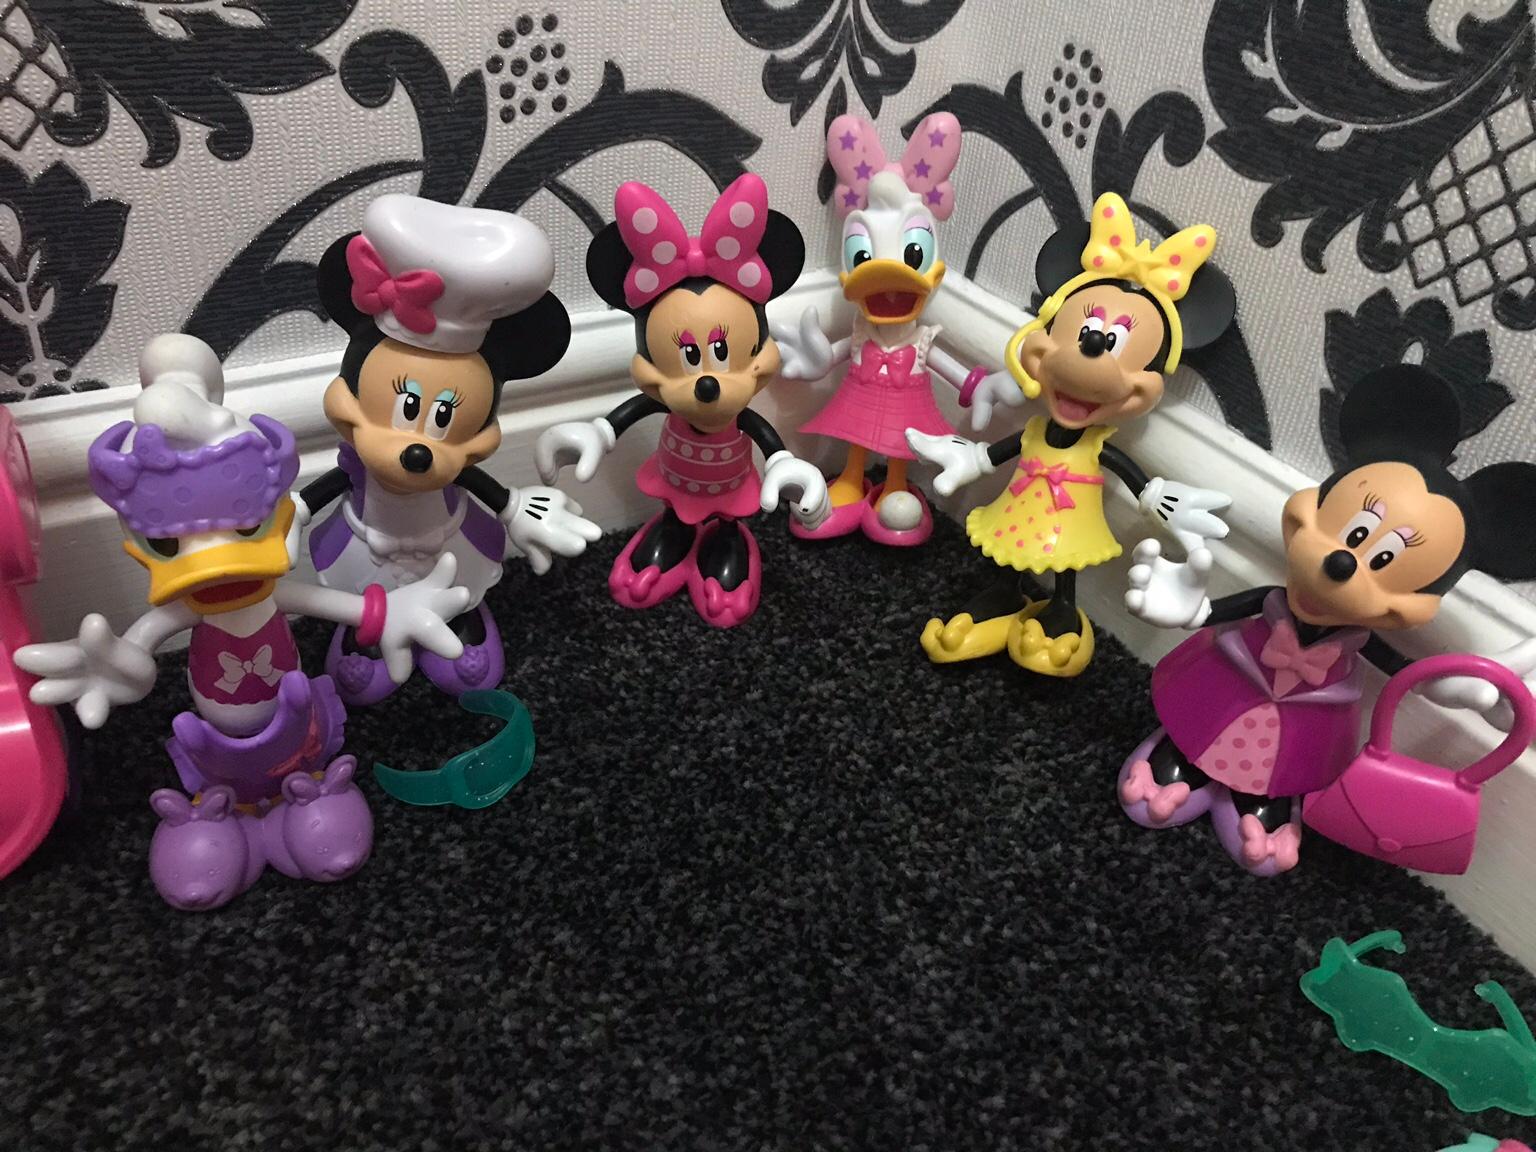 Minnie Mouse bowtique playset bundle in S66 Doncaster for £10.00 for